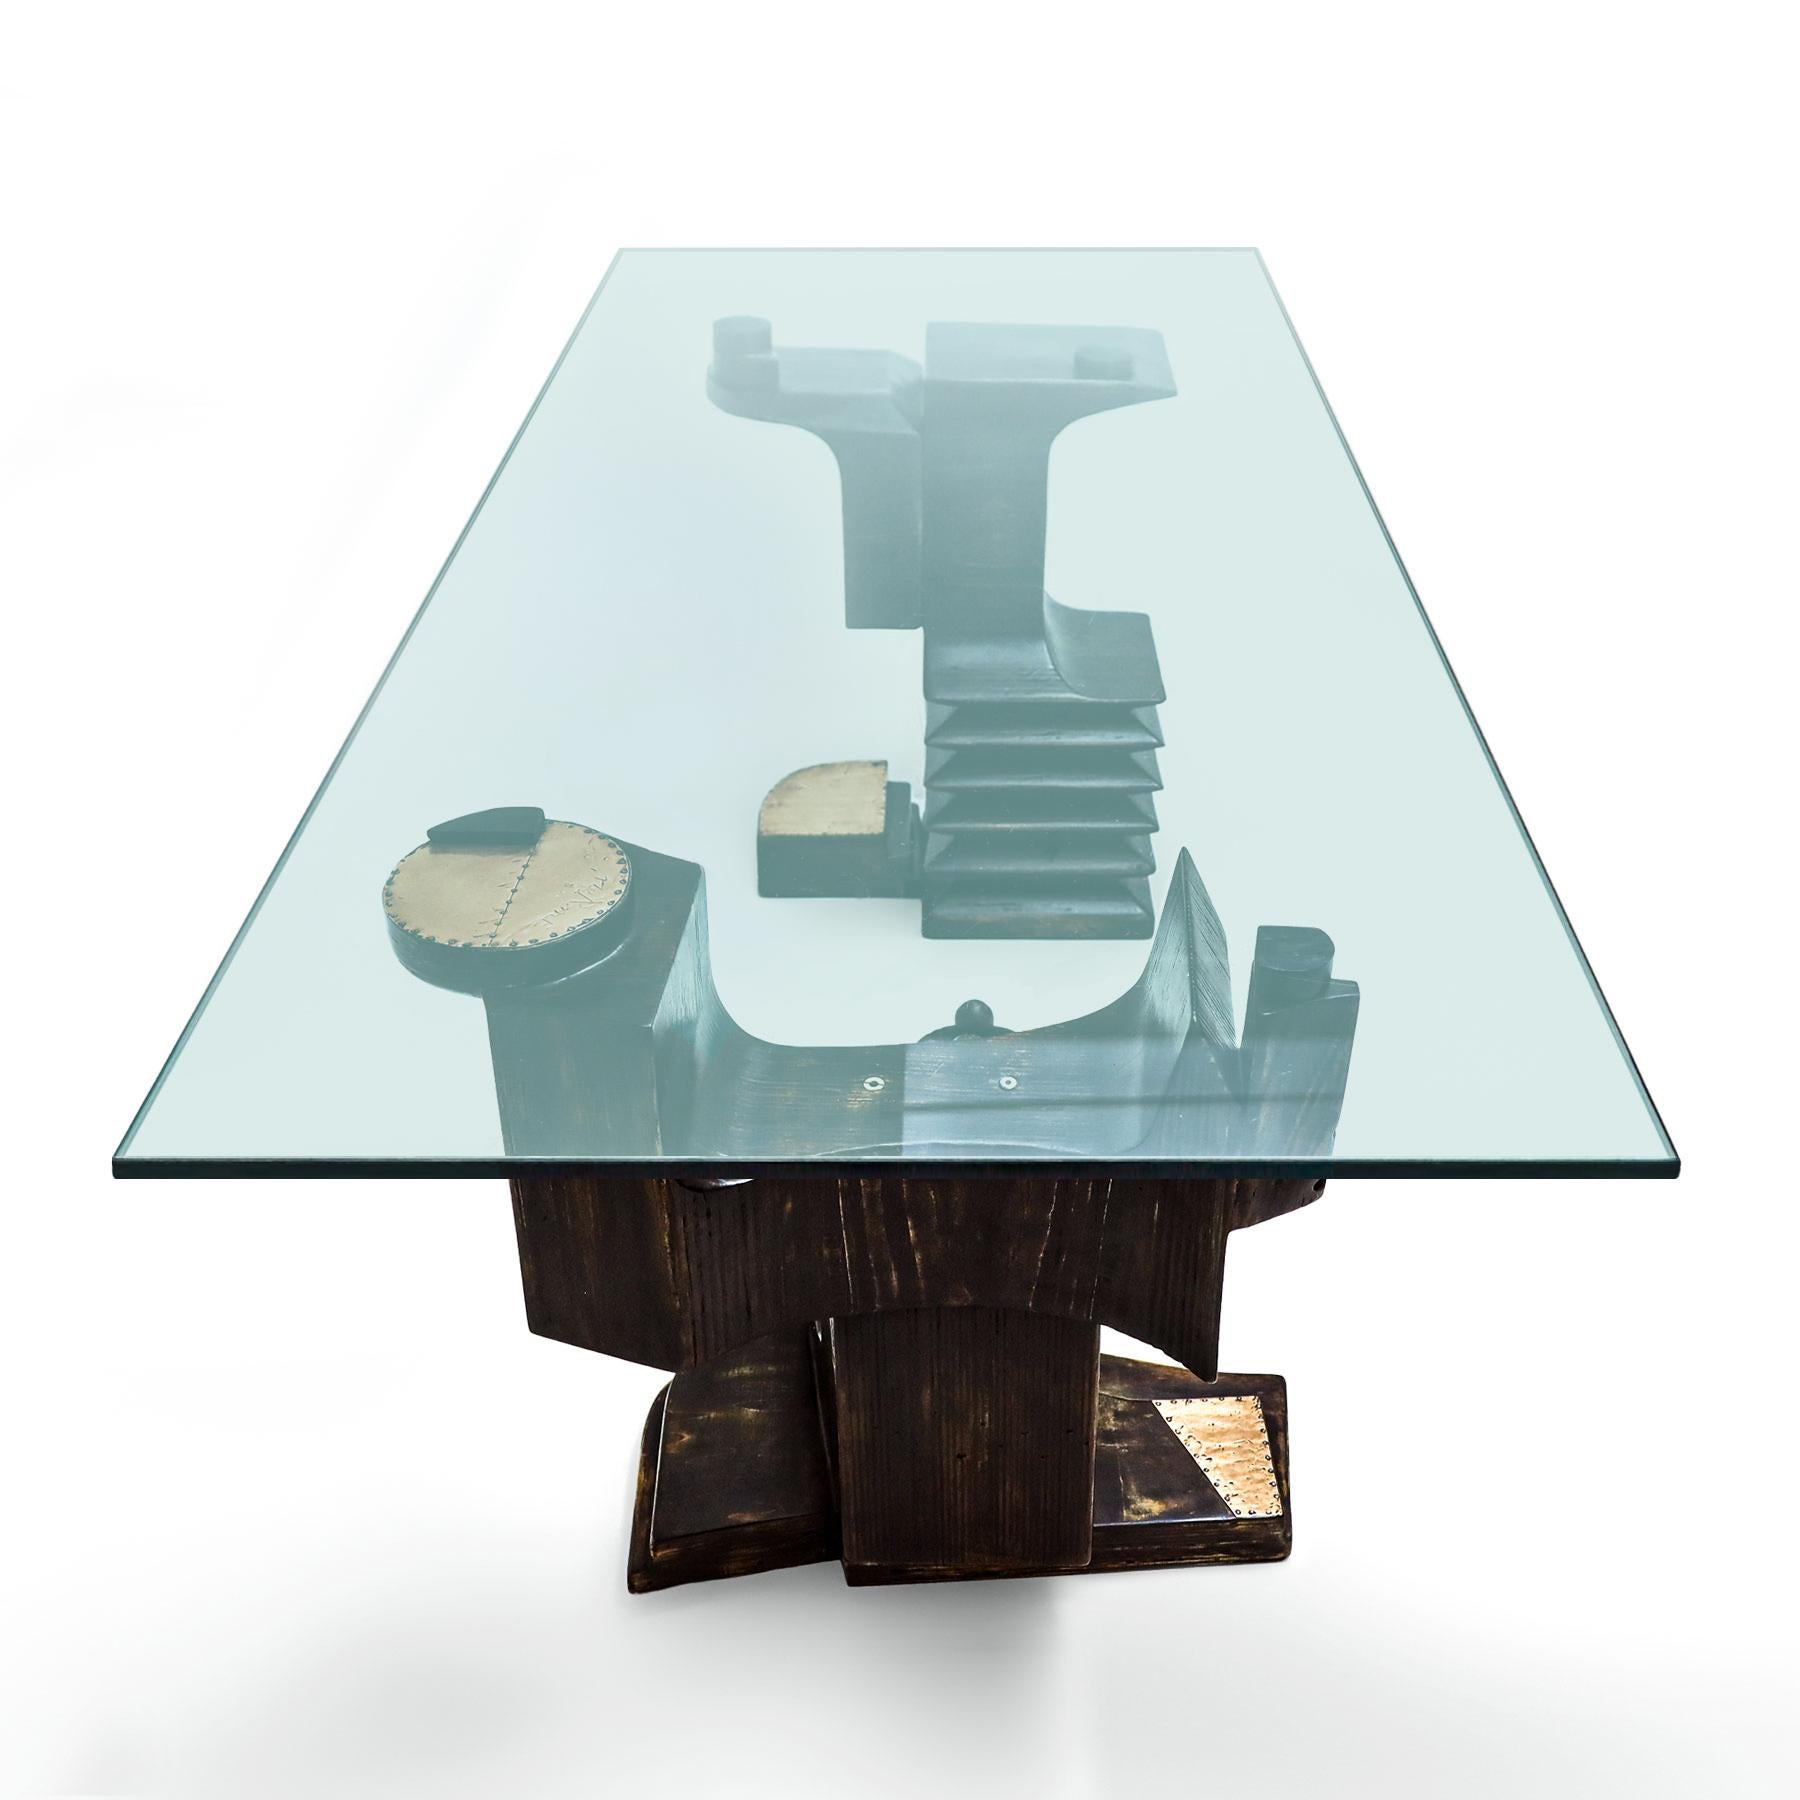 Vintage brutalist Italian hand carved wooden and glass dining table by Nerone, (Giovanni Ceccarelli), co-founder of Gruppo NP2, Nerone & Patuzzi. Supplied with certificate of authentication notarised by Saar Ceccarelli, Archivio Nerone Giovanni